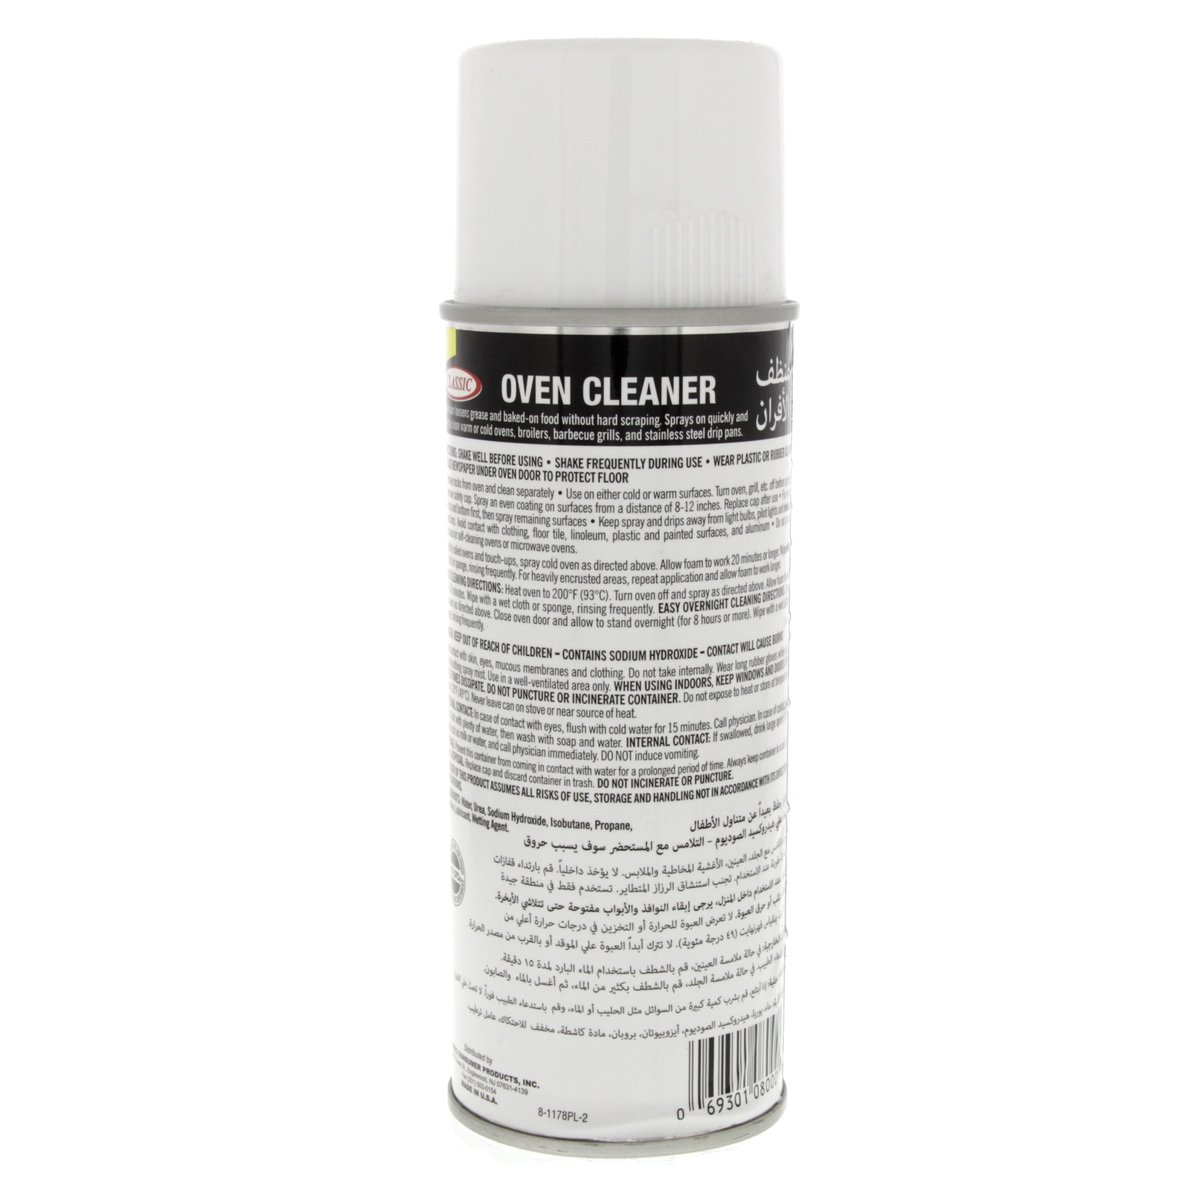 Classic Oven Cleaner 453g